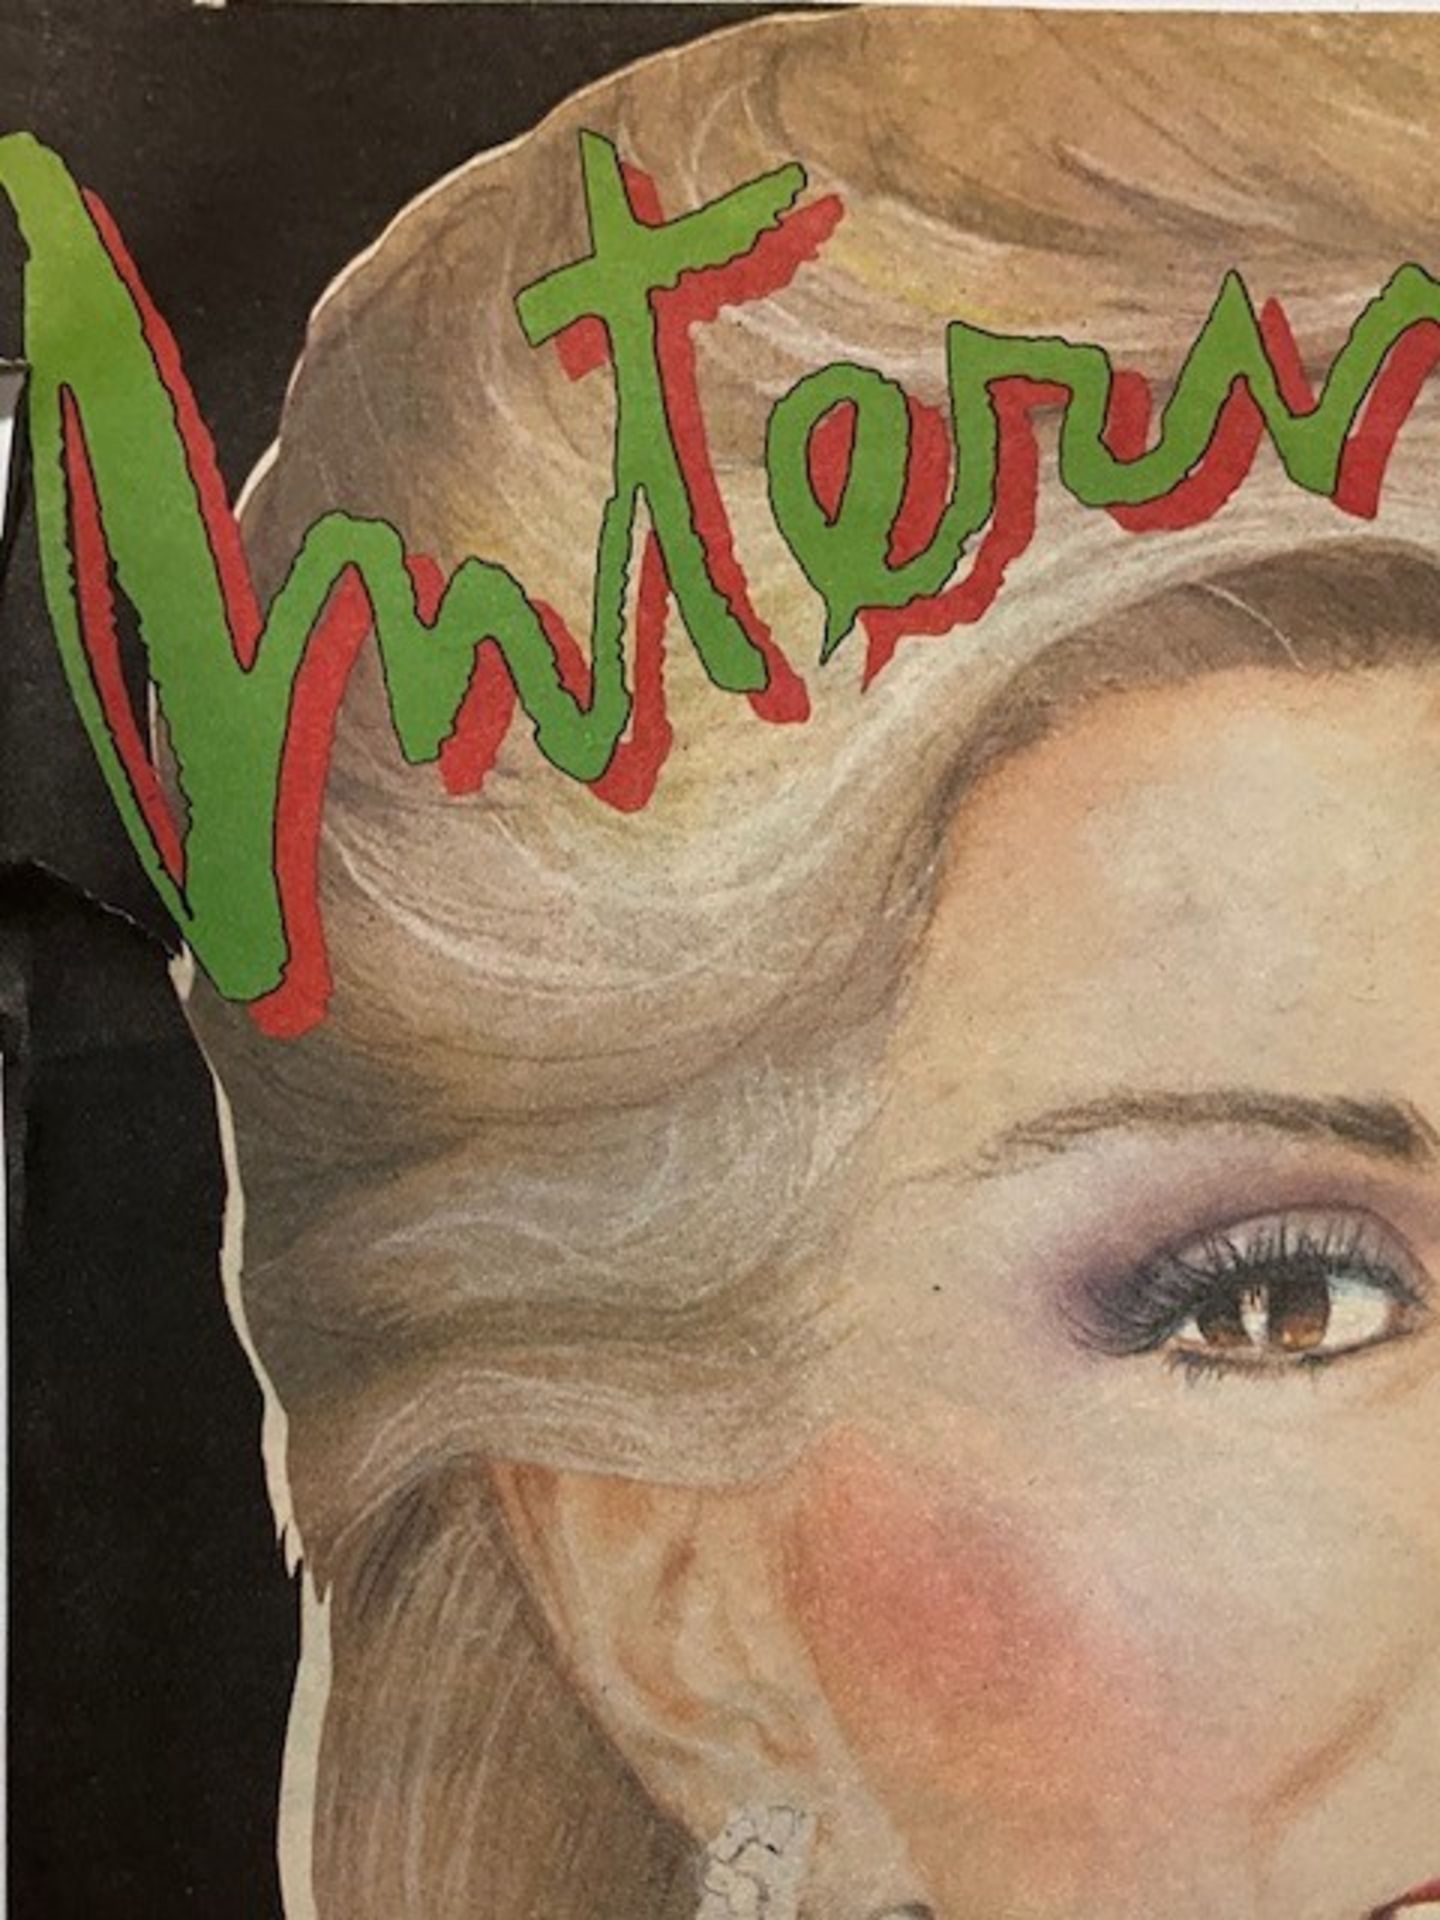 Andy Warhol" JOAN RIVERS" Hand Signed Interview Magazine Cover - Image 6 of 6